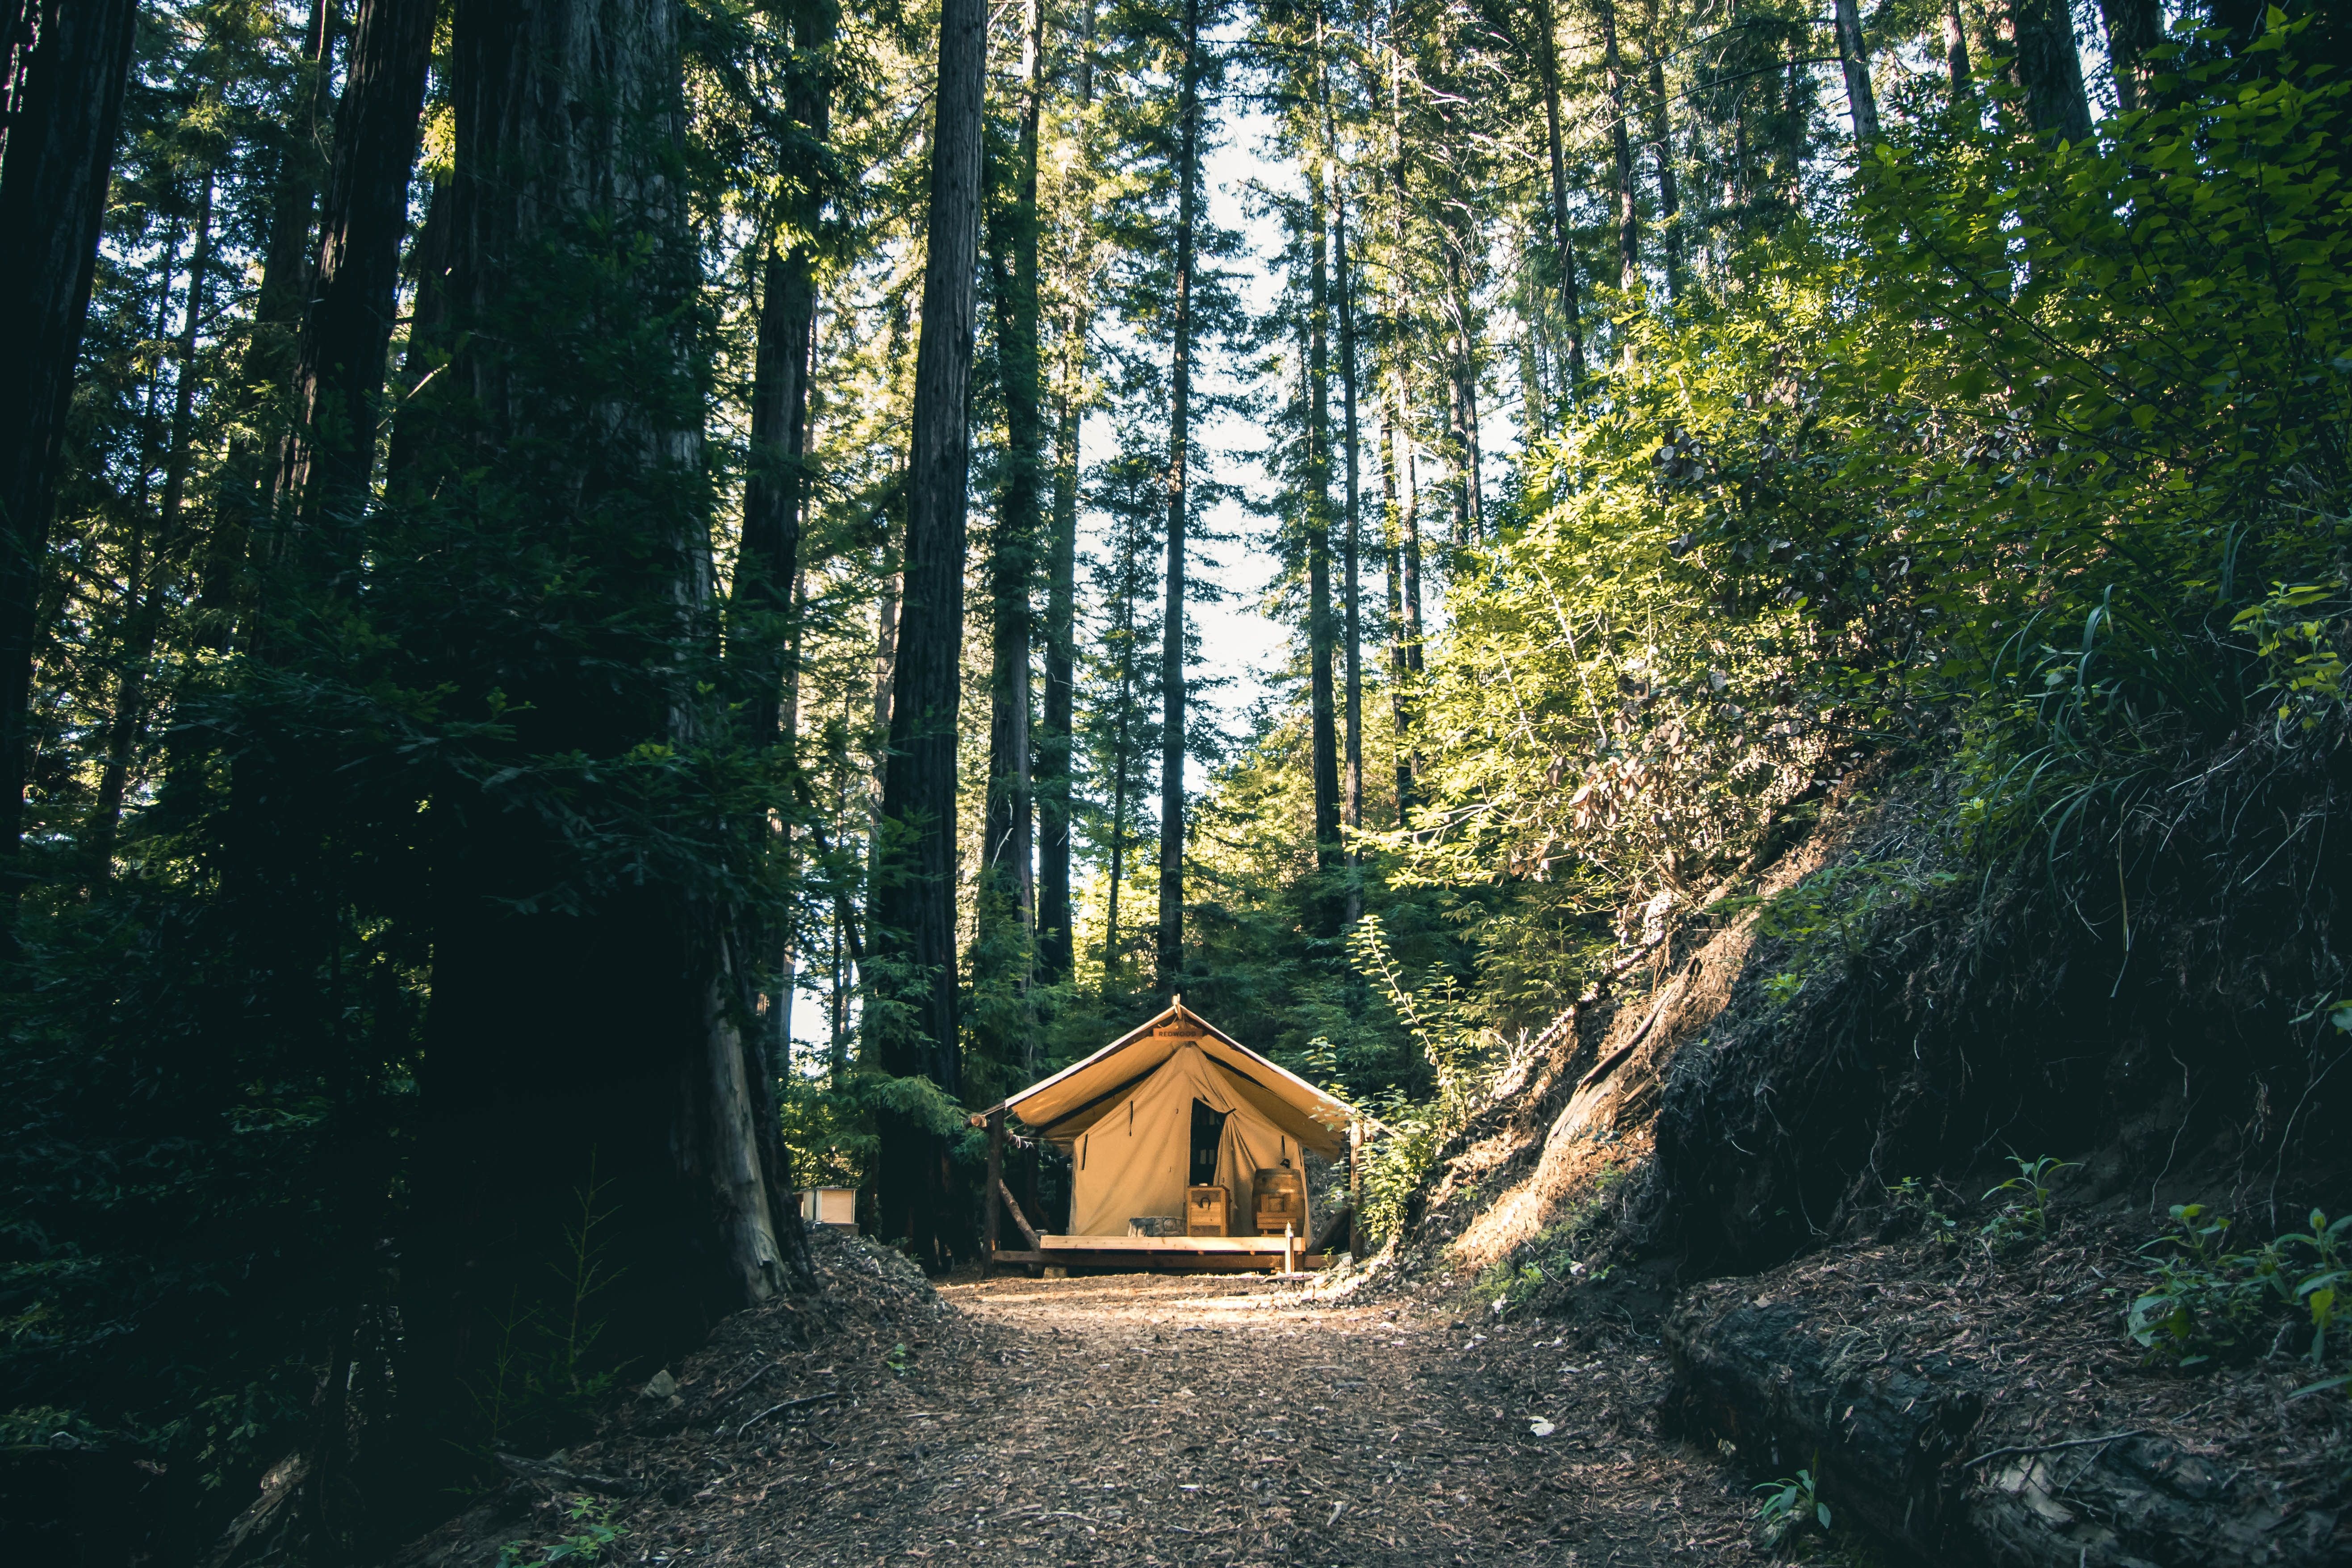 A cabin located amidst redwoods in Big Sur, California